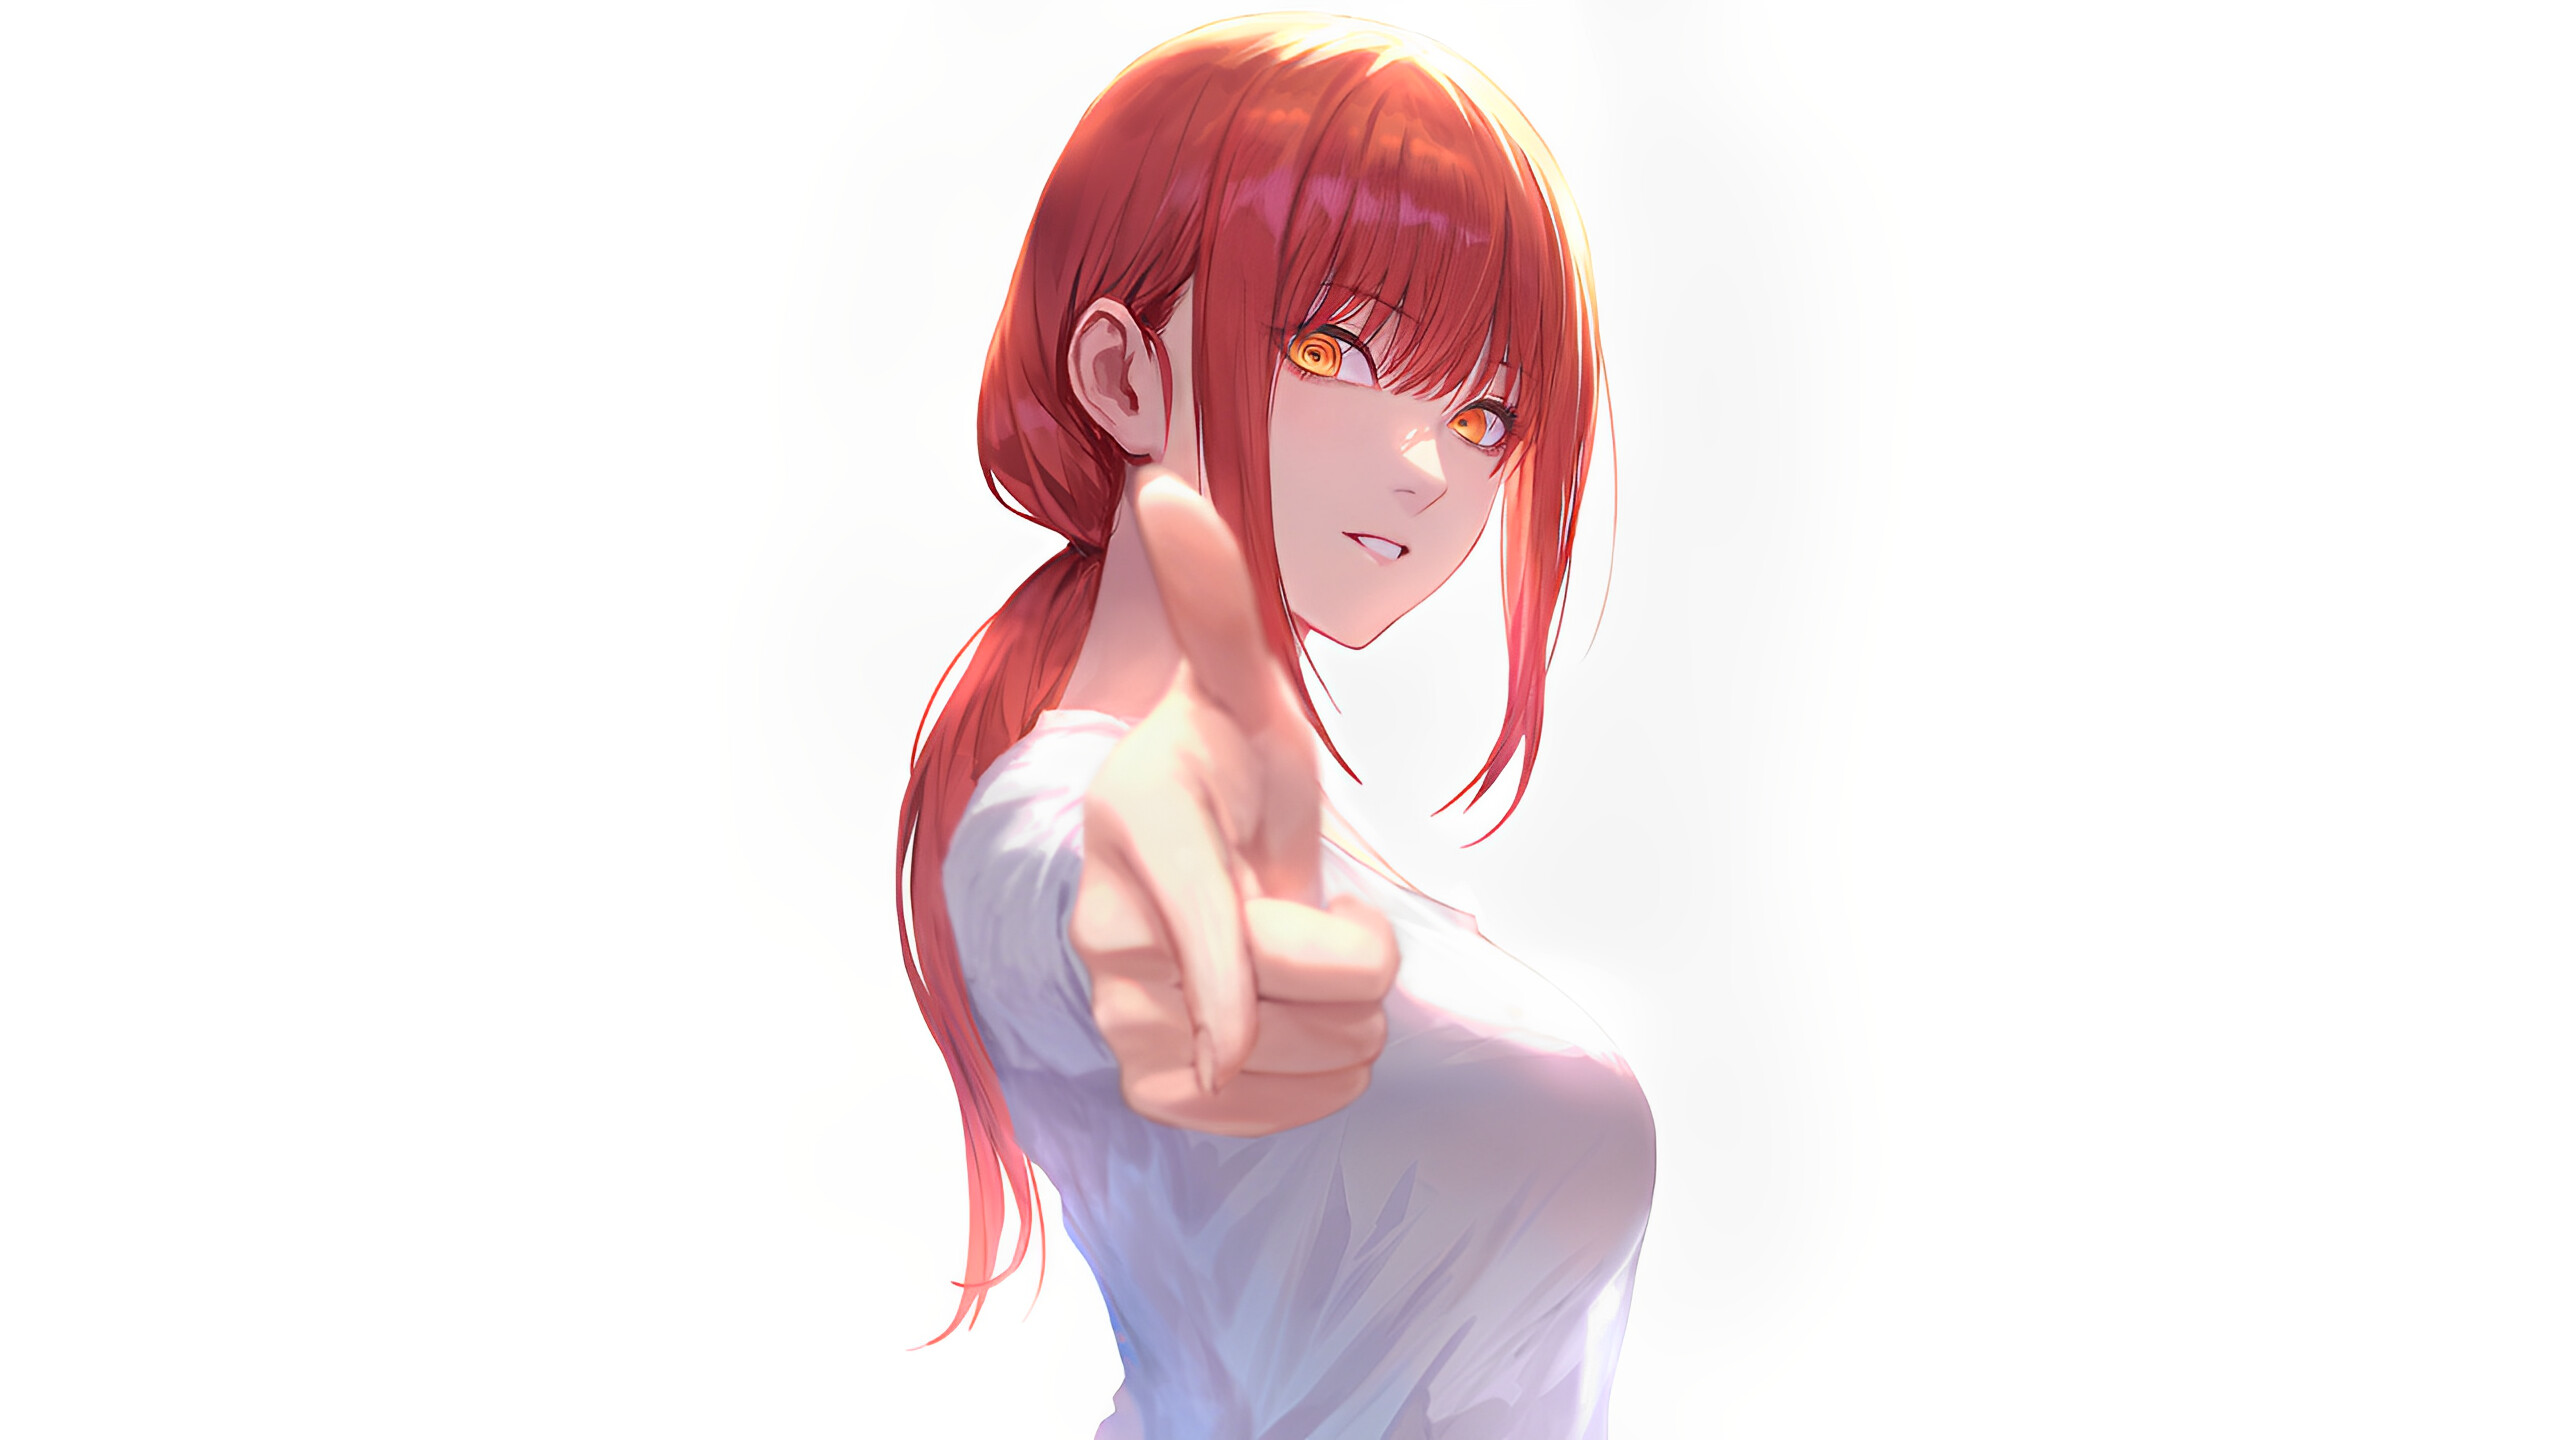 Anime Girls Women White Background Simple Background Minimalism Finger Pointing Chainsaw Man Redhead 2560x1440